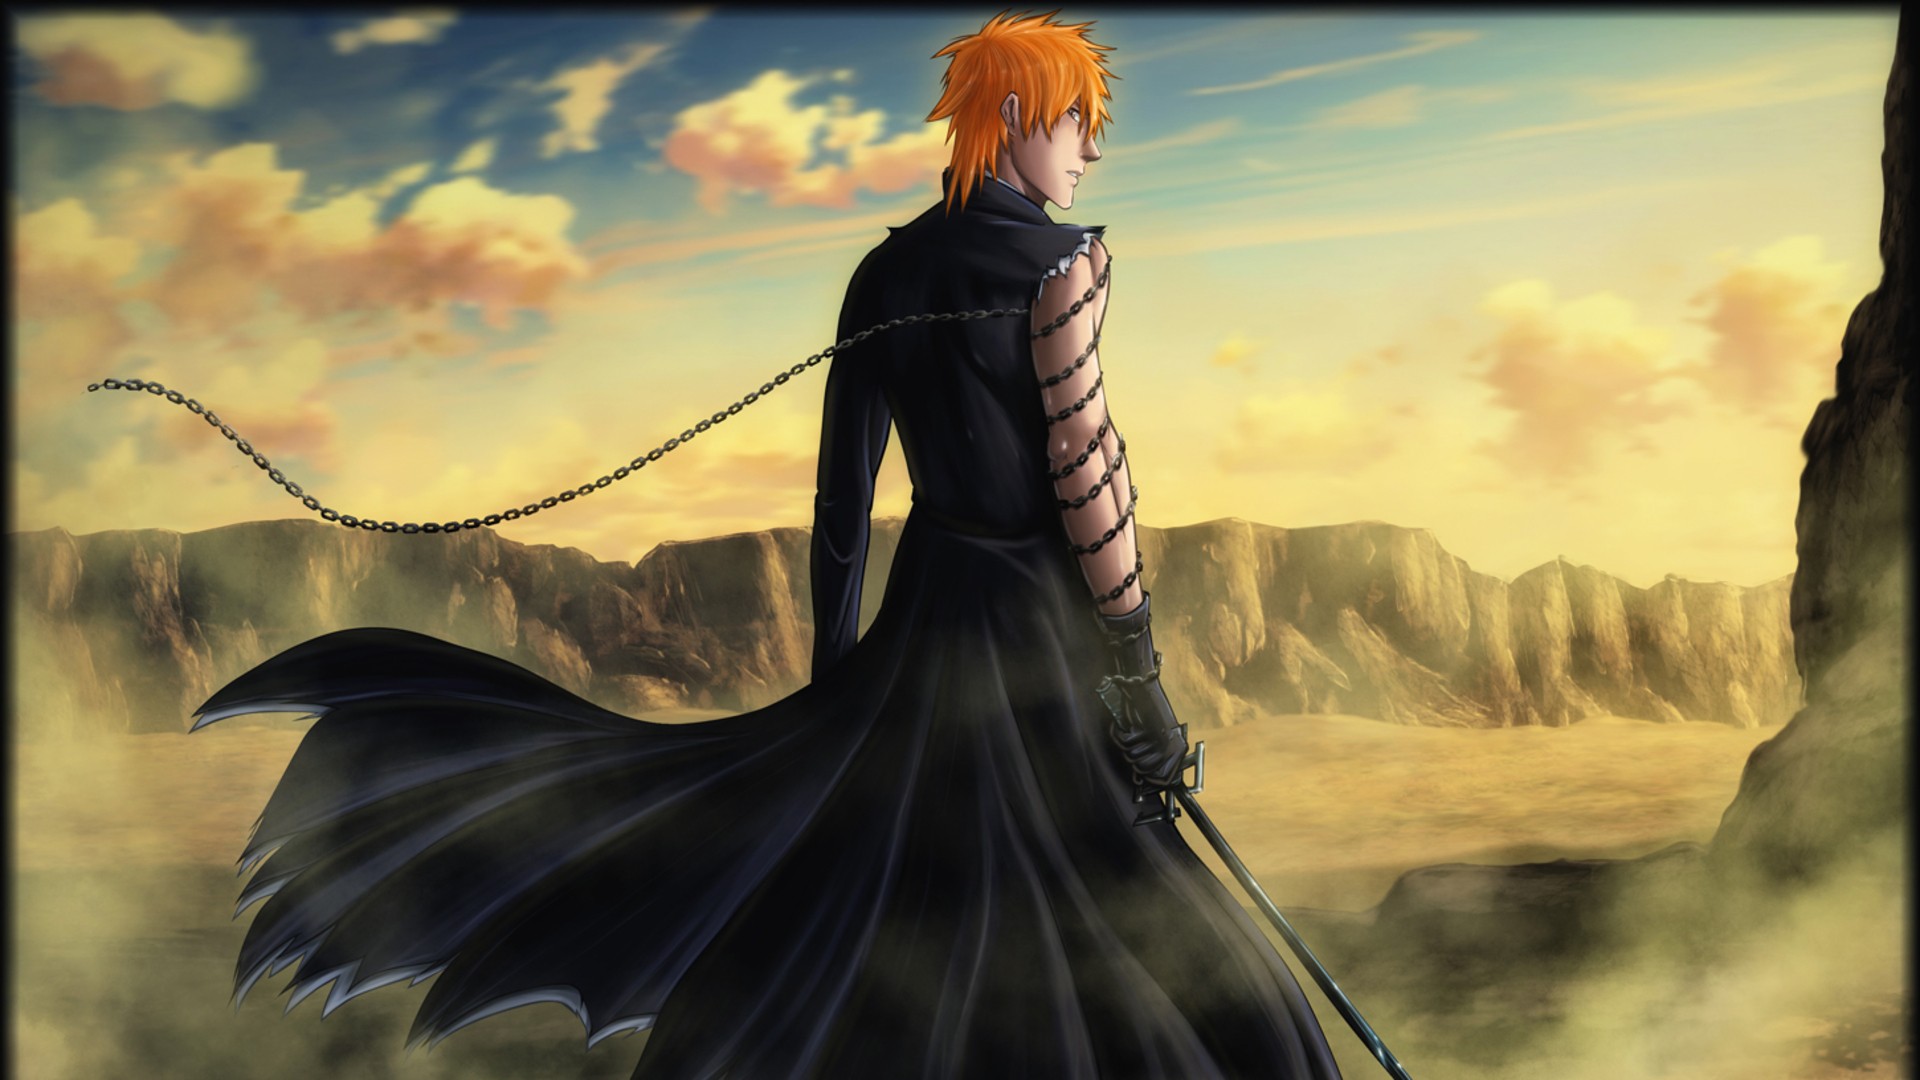 Bleach phone wallpaper 1080P 2k 4k Full HD Wallpapers Backgrounds Free  Download  Wallpaper Crafter  Page 4